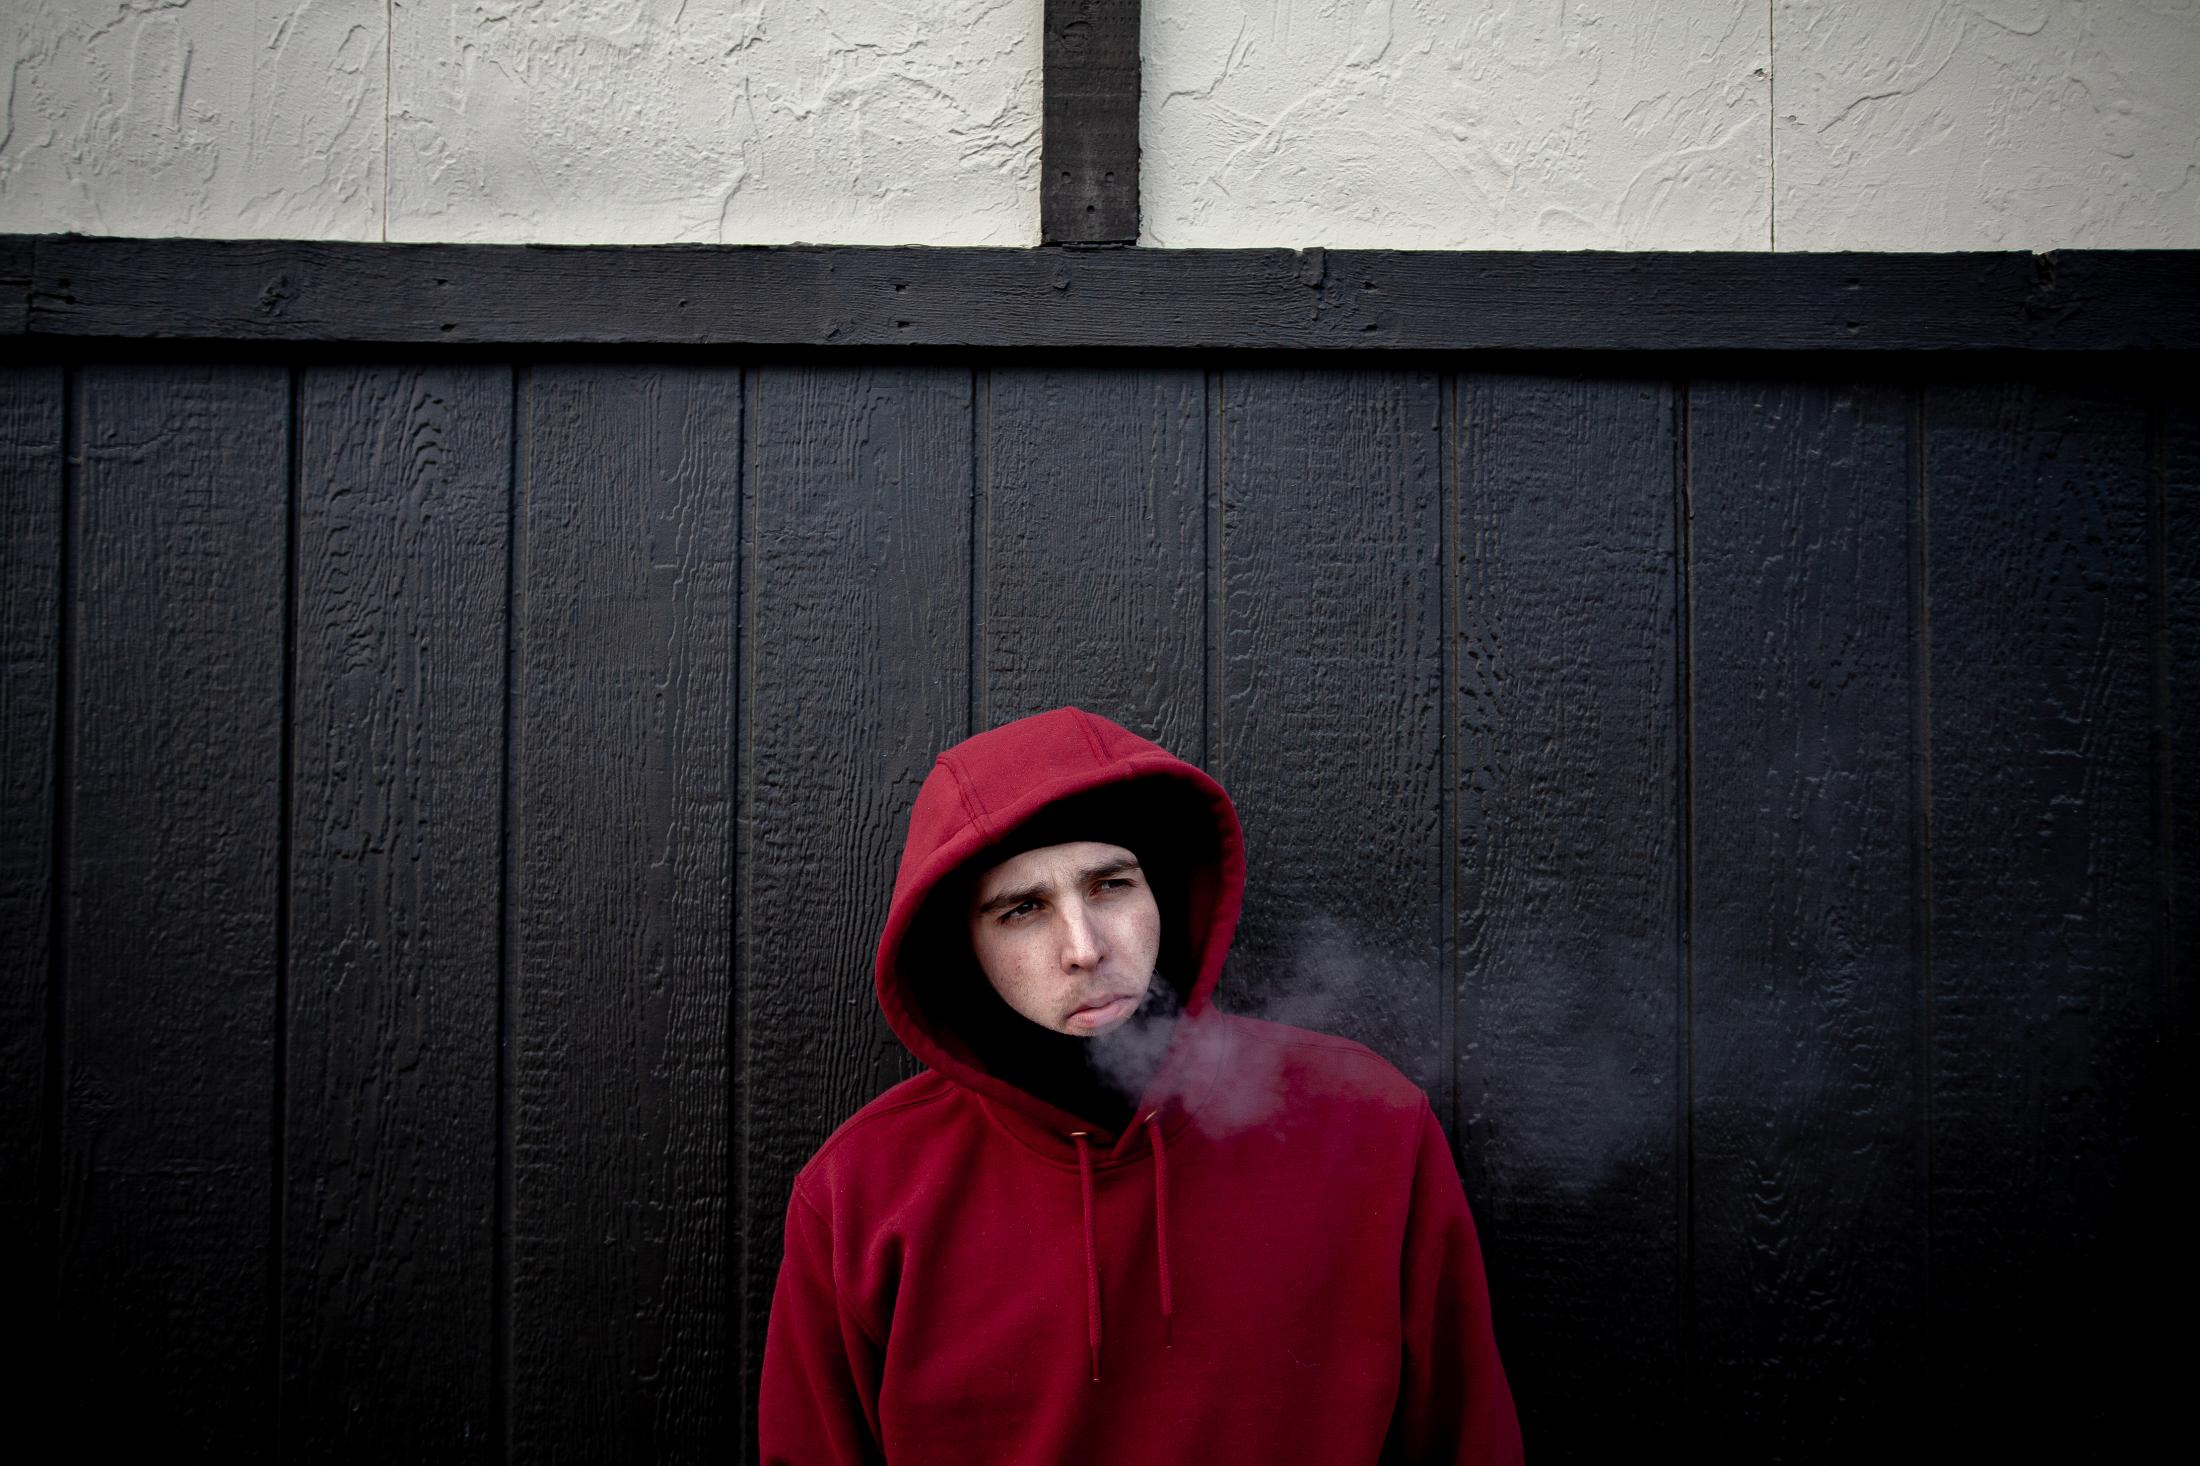 2/5/14- North Dakota - Adam Braum, 26, stands outside his hotel room that he has been sent to by...